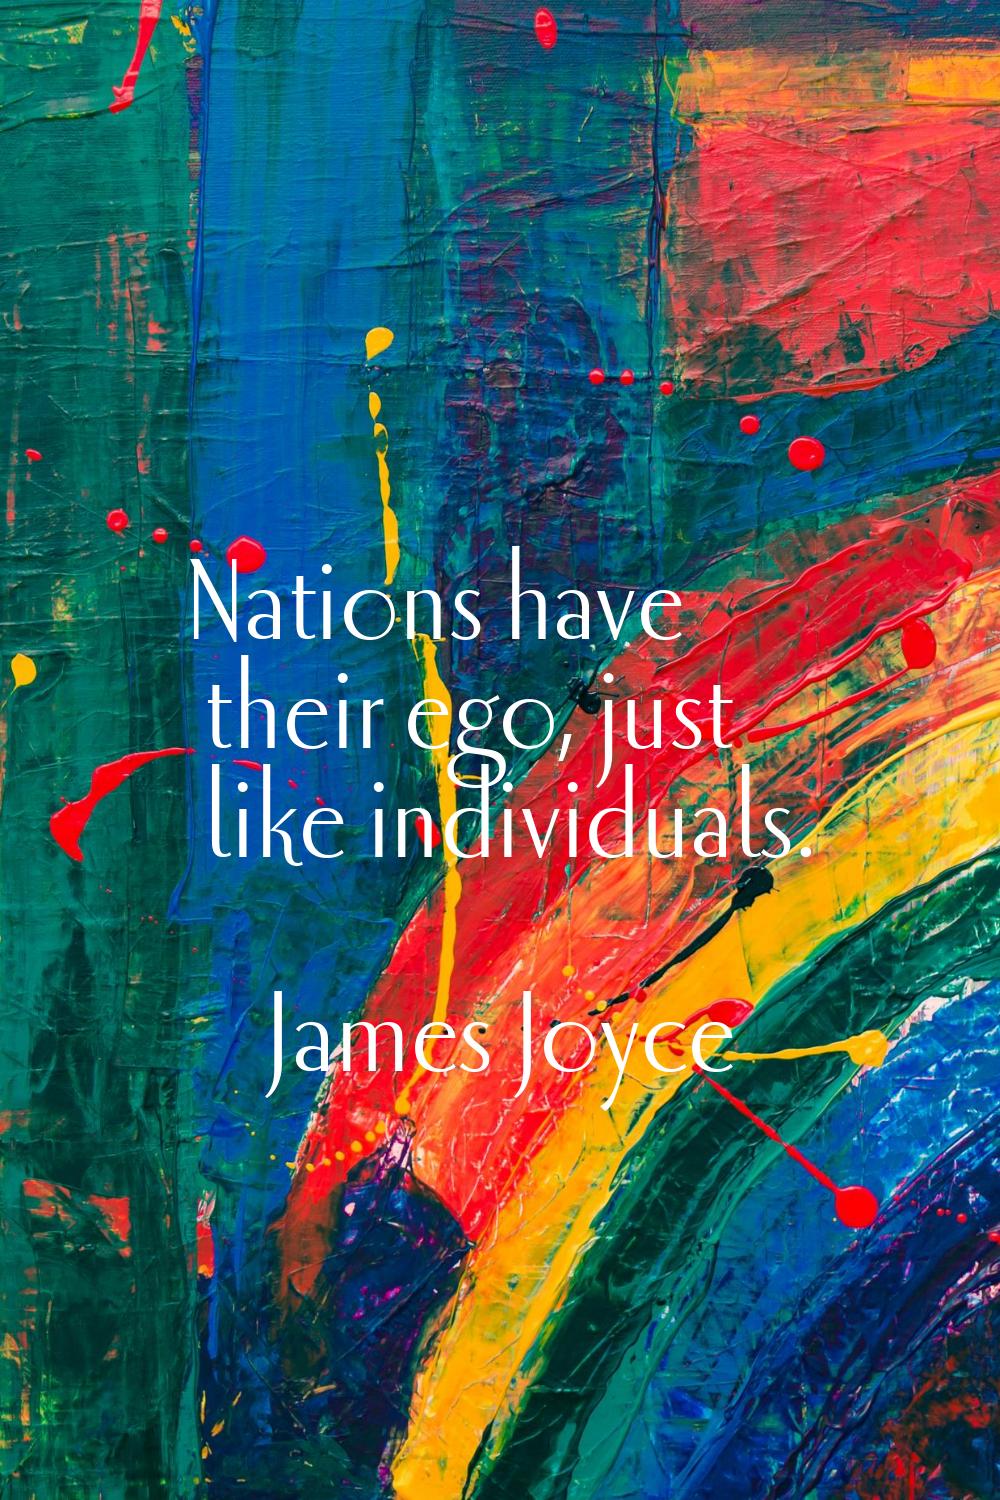 Nations have their ego, just like individuals.